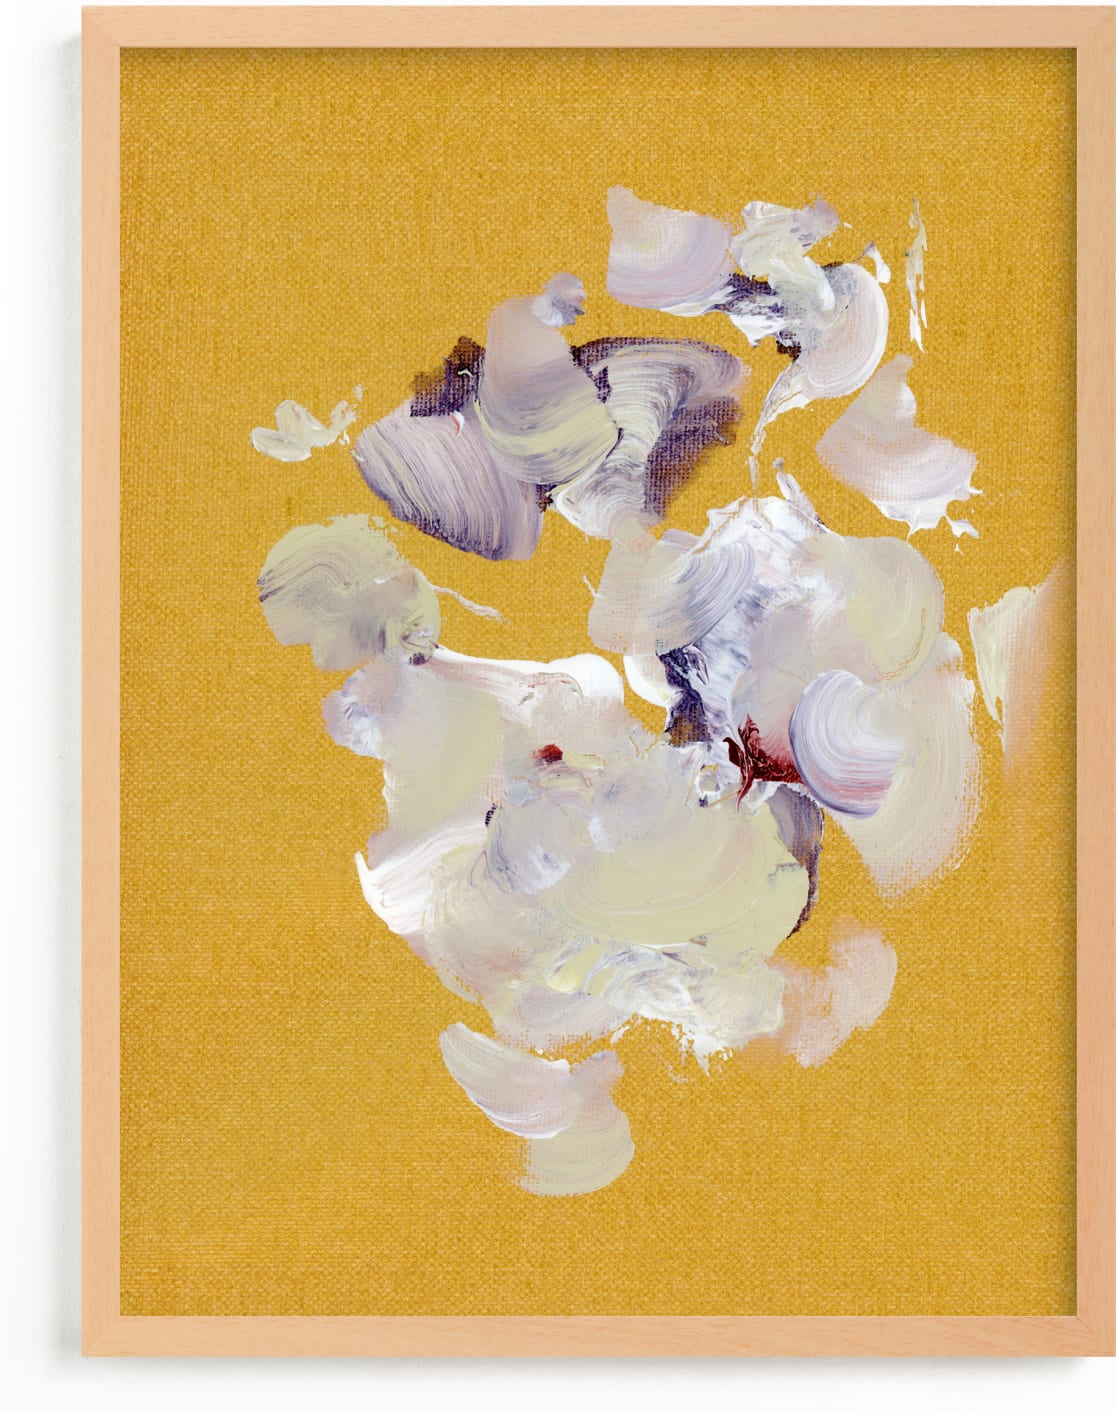 This is a purple, white, gold art by Lindsay Megahed called Goldie.